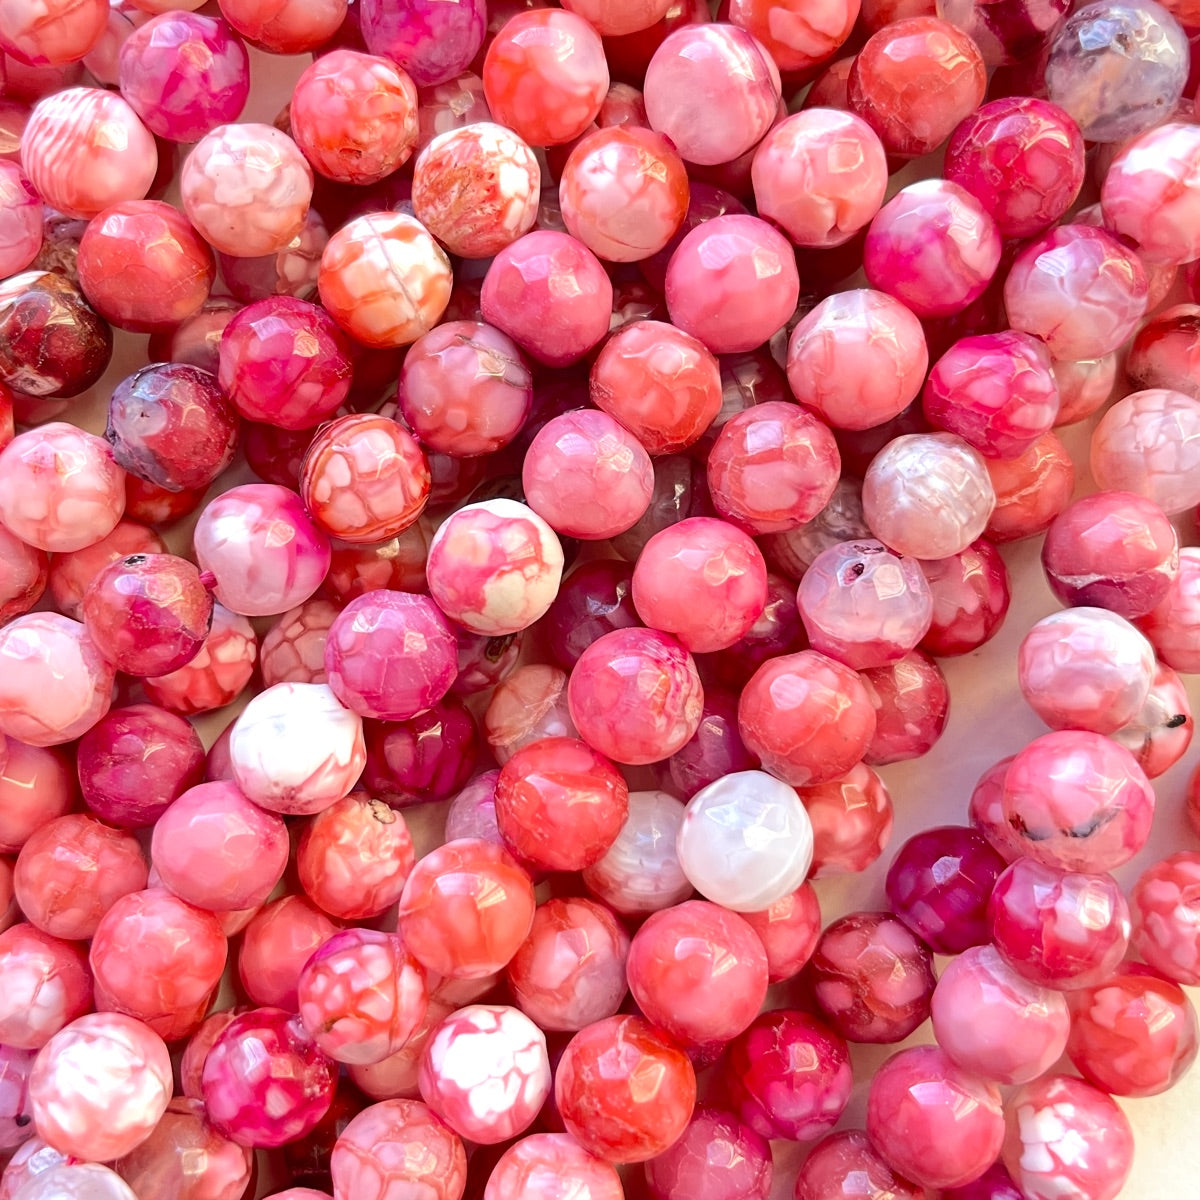 2 Strands/lot 8mm Colorful Cracked Fire Agate Faceted Stone Beads Pink Stone Beads 8mm Stone Beads Faceted Agate Beads New Beads Arrivals Charms Beads Beyond